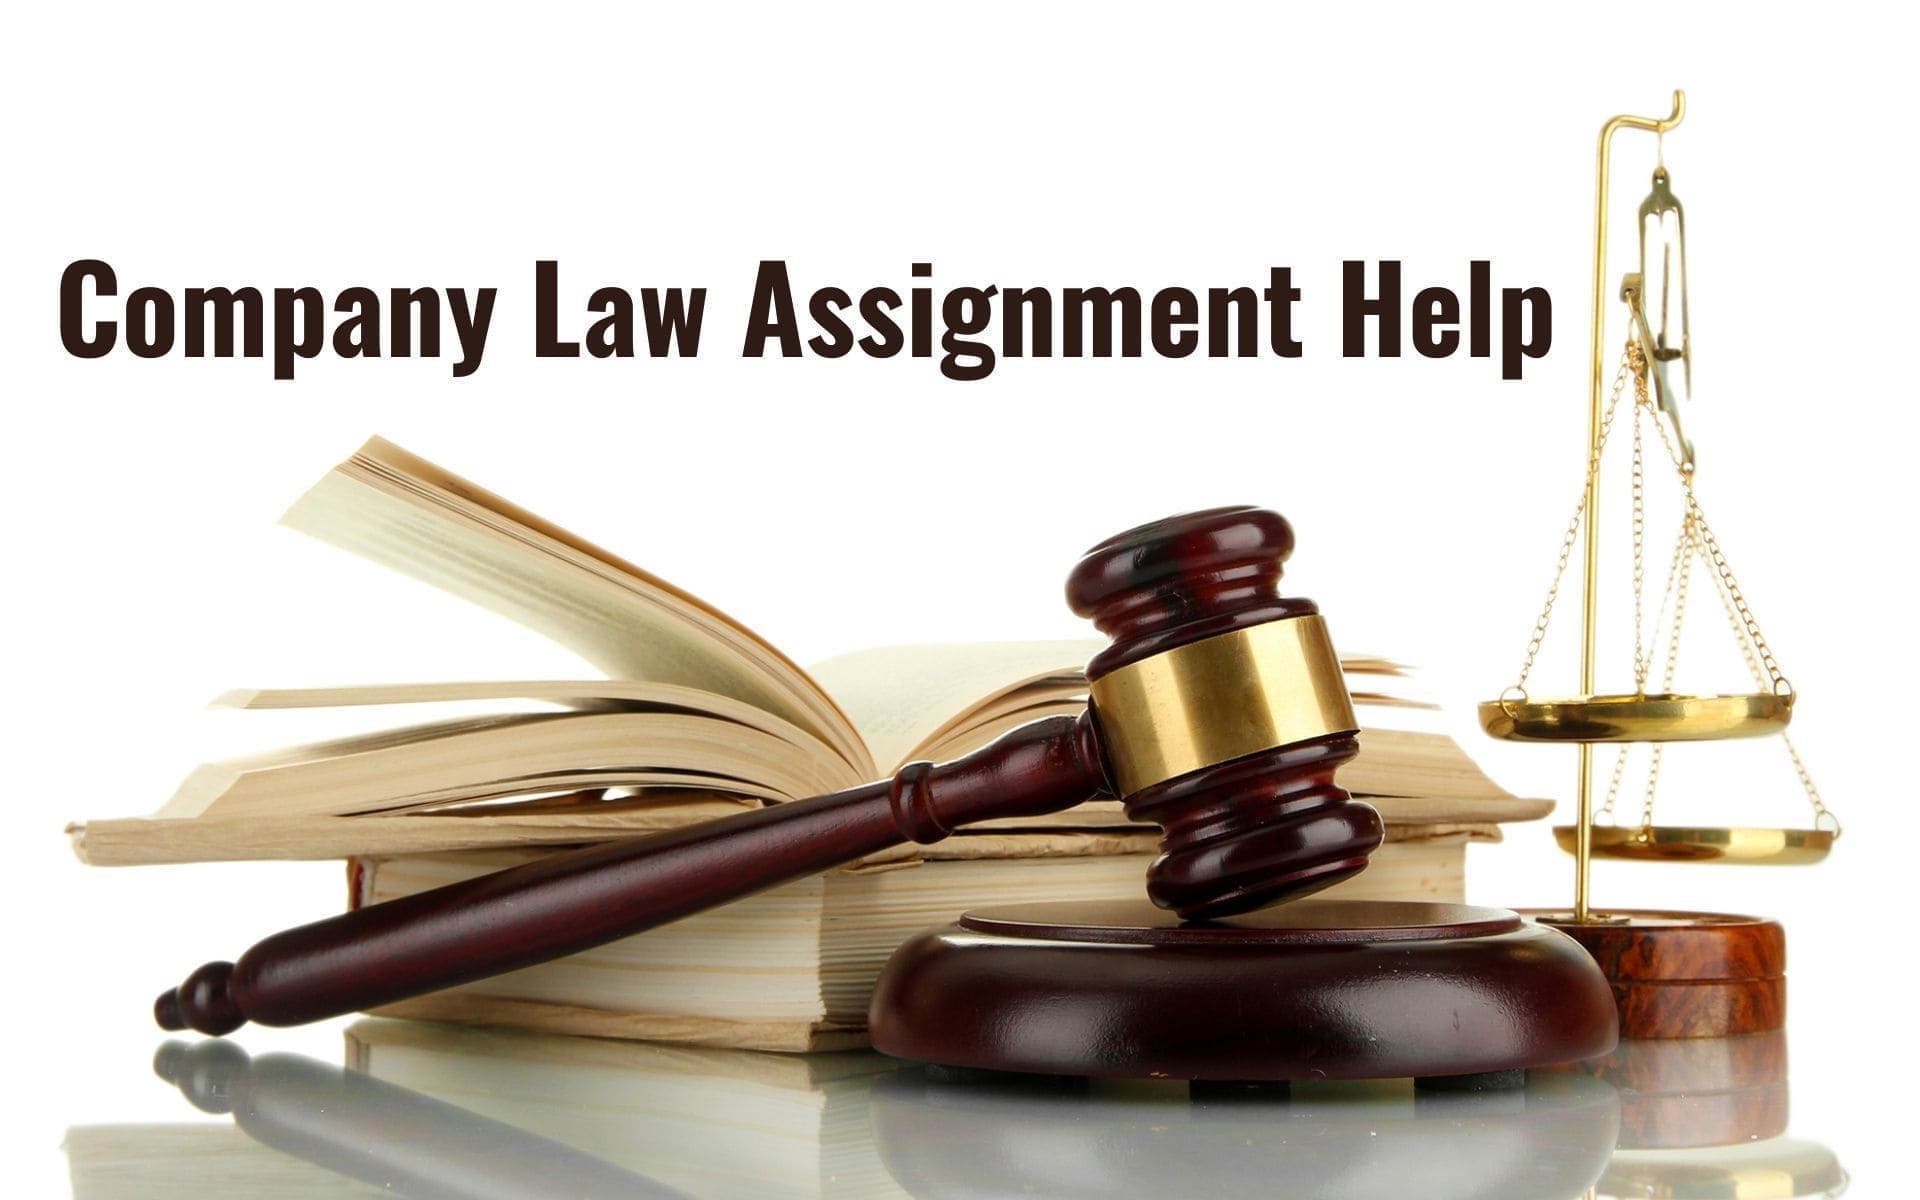 How can you score well with our Company Law Assignment Help?